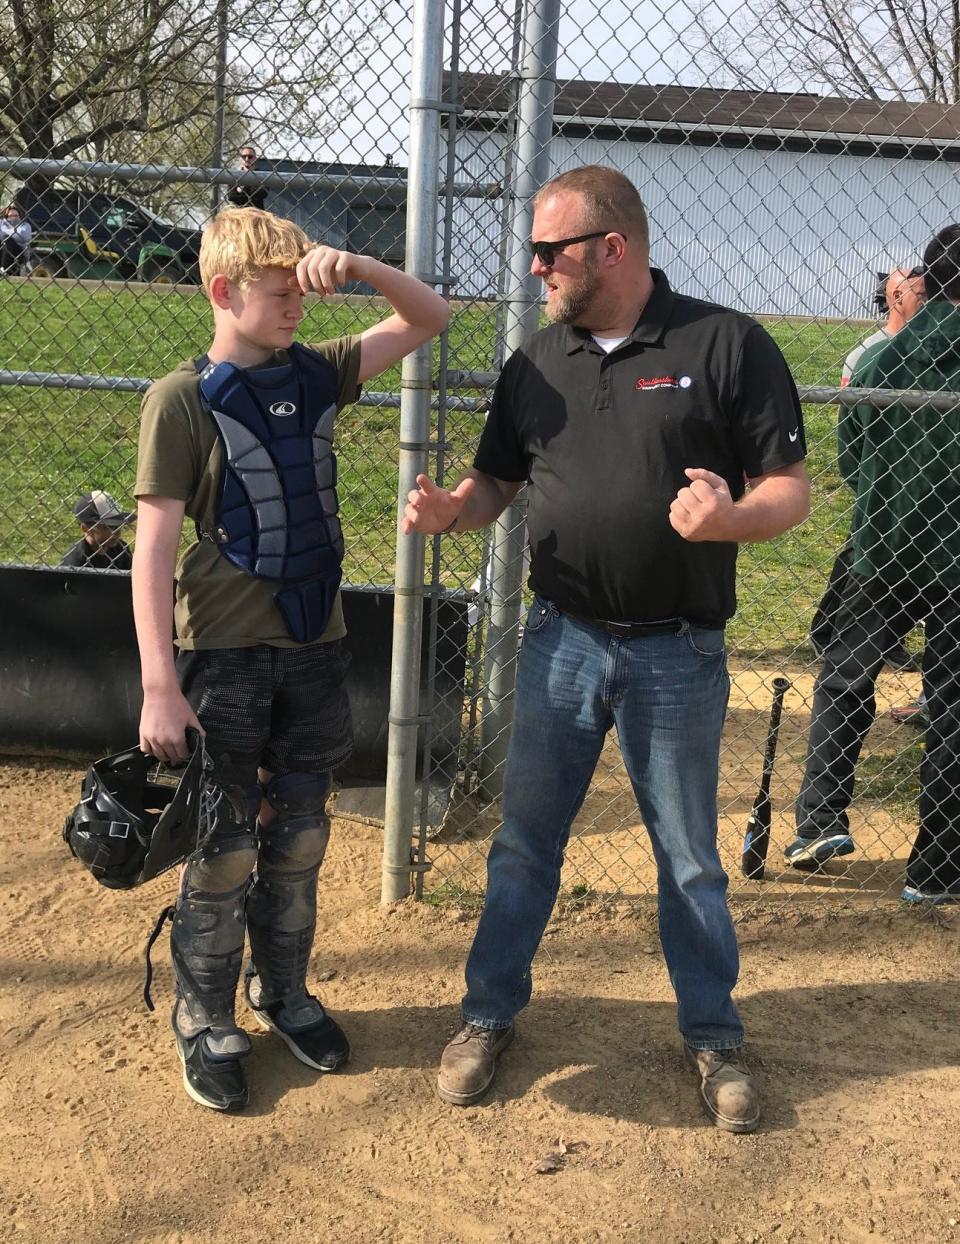 Cambridge Little League president Travis Daugherty talks to a young umpire as he prepares to call his first game.  The Cambridge Little League will hold its Opening Day Celebration on Saturday.